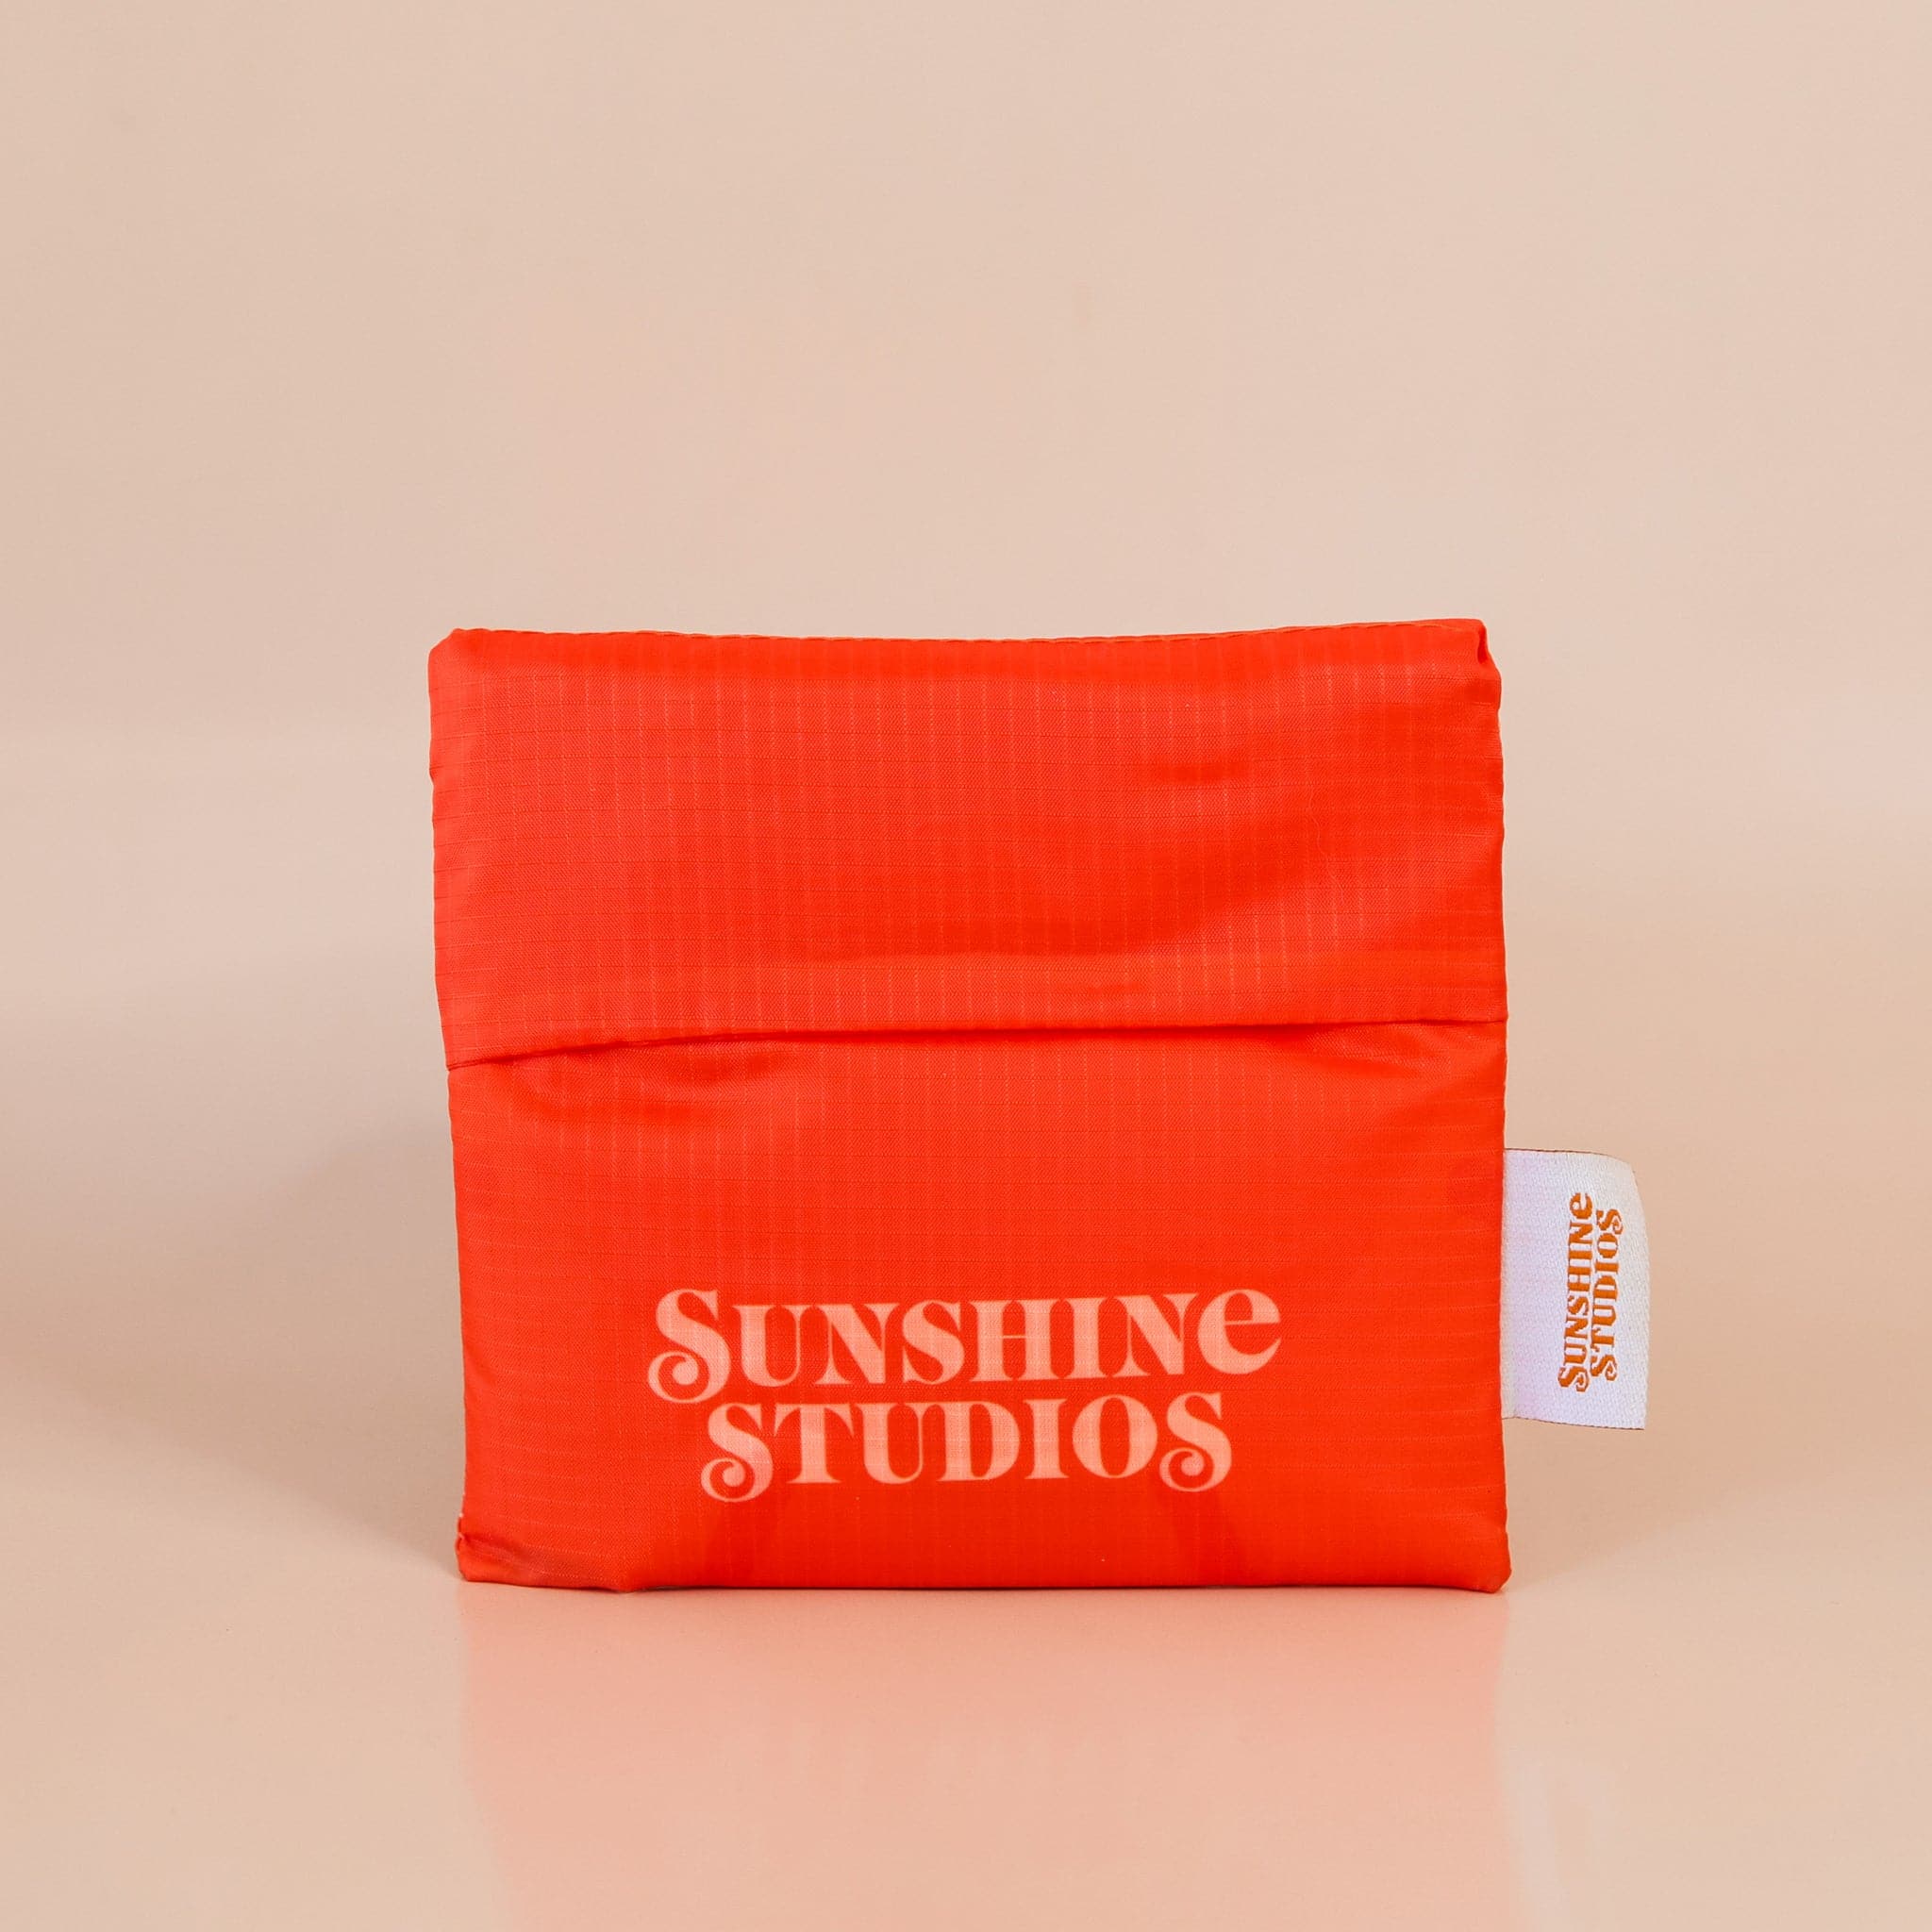 Red-orange nylon bag folded up into a compact square. The bag reads &#39;sunshine studios&#39; in off white lettering and has a small white tag that reads &#39;sunshine studios&#39; in orange lettering.